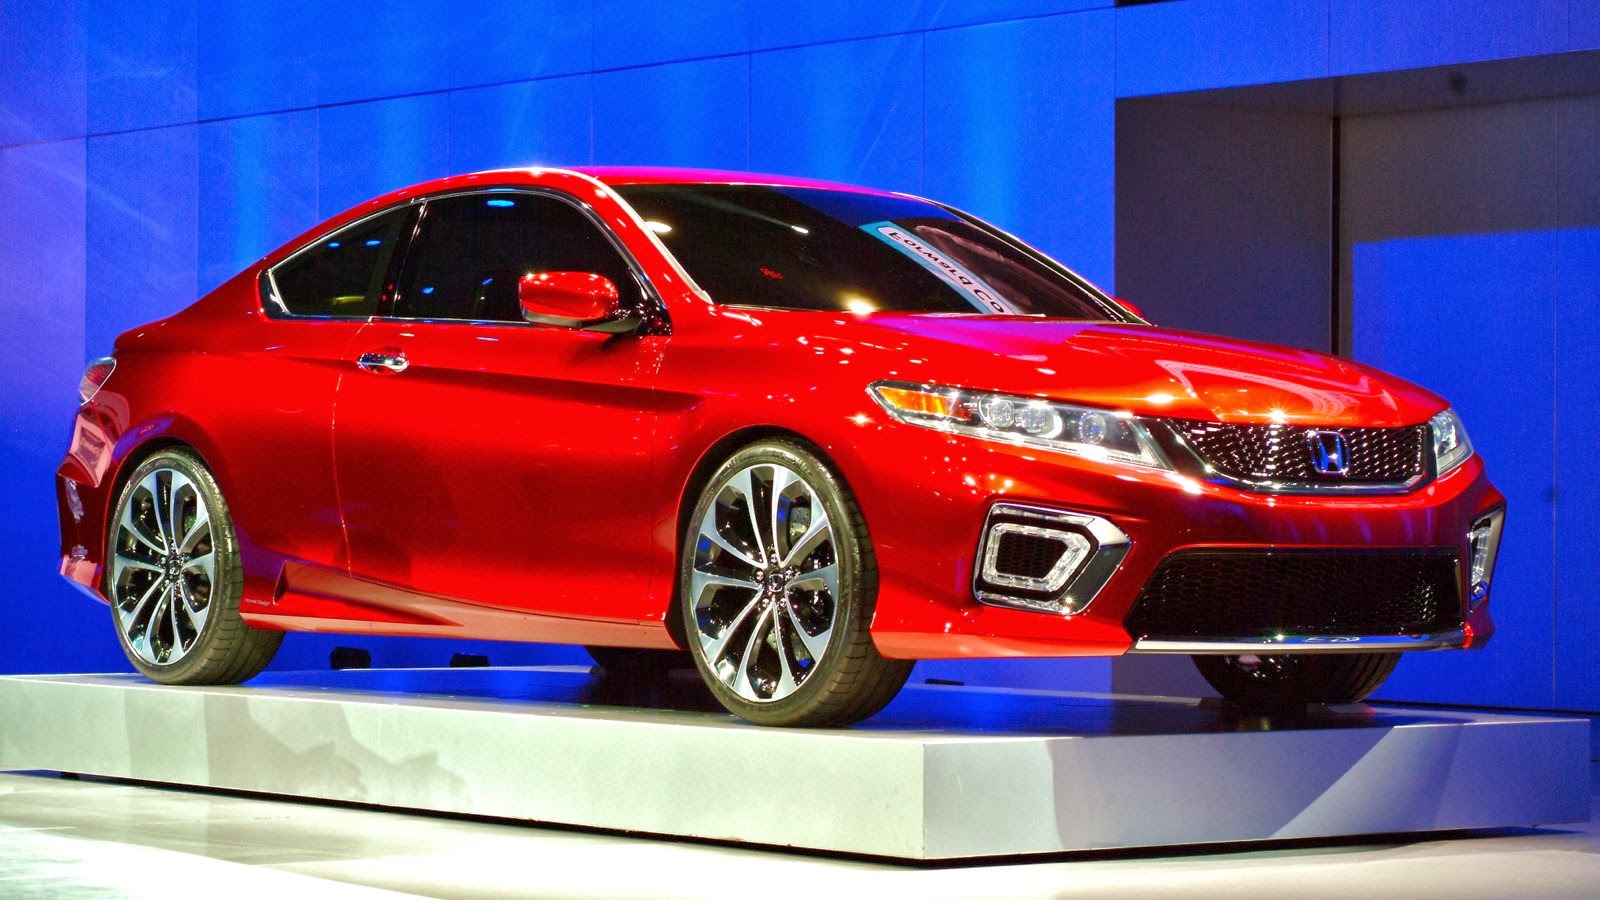 2015 Honda Accord Release Date and Price | Car Release Date, Price and